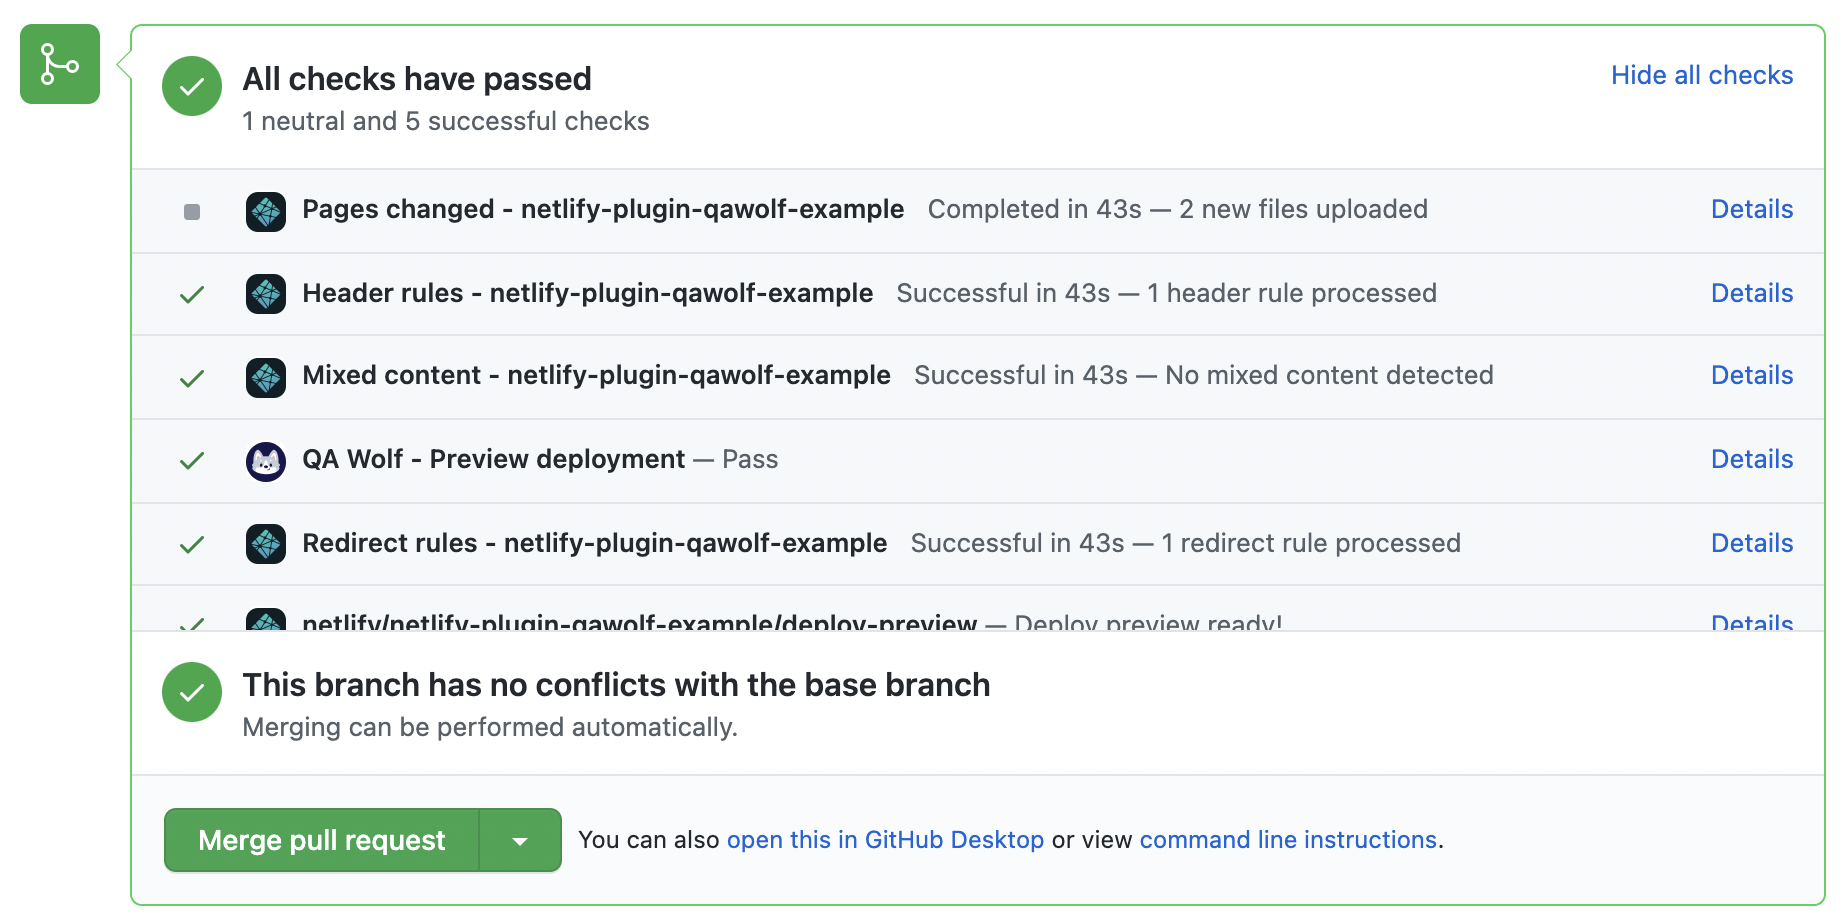 End-to-end testing with QA Wolf and Netlify